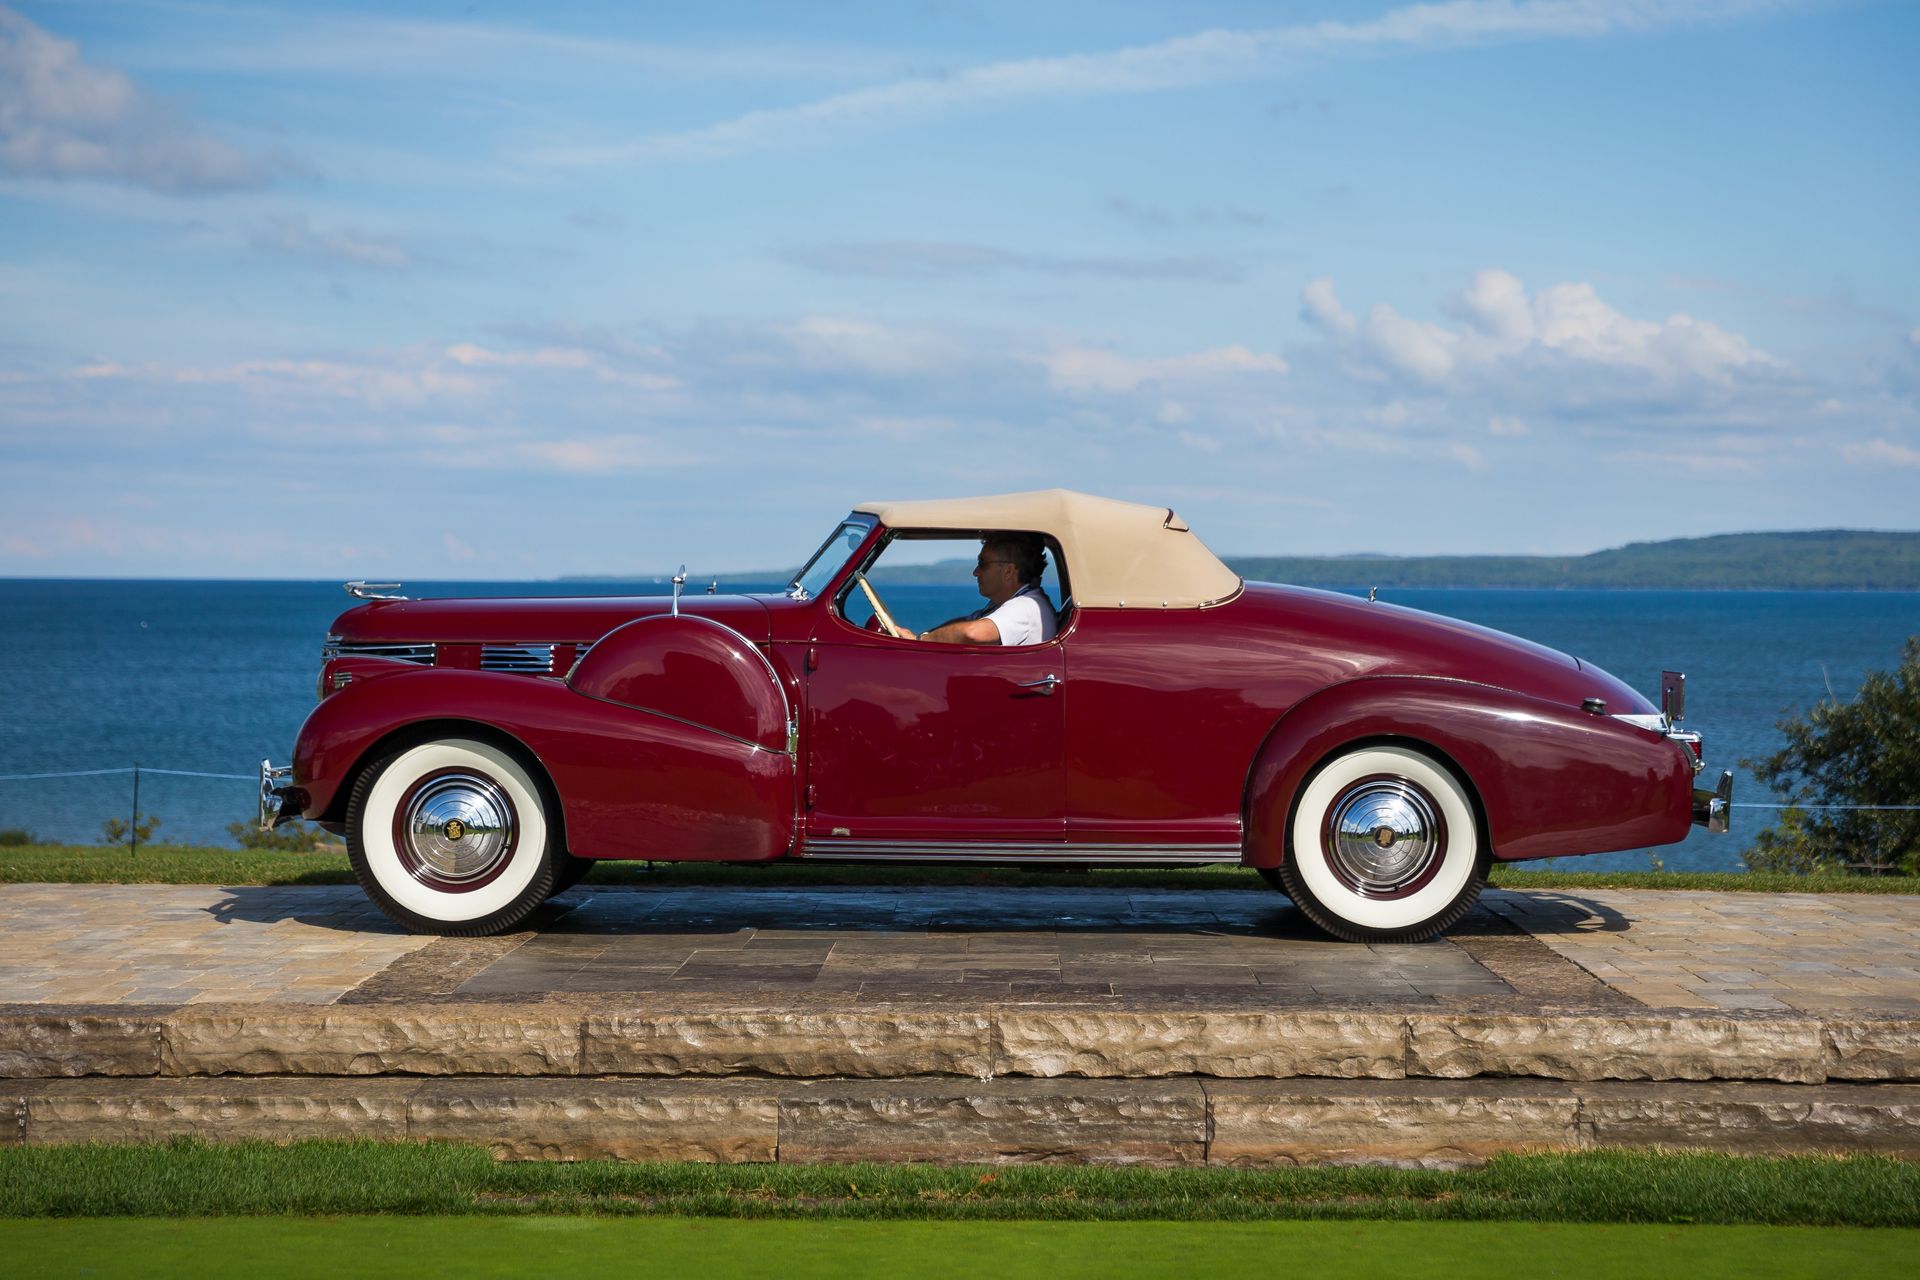 1938 Cadillac Brunn Bodied Roadster- NAACC Award